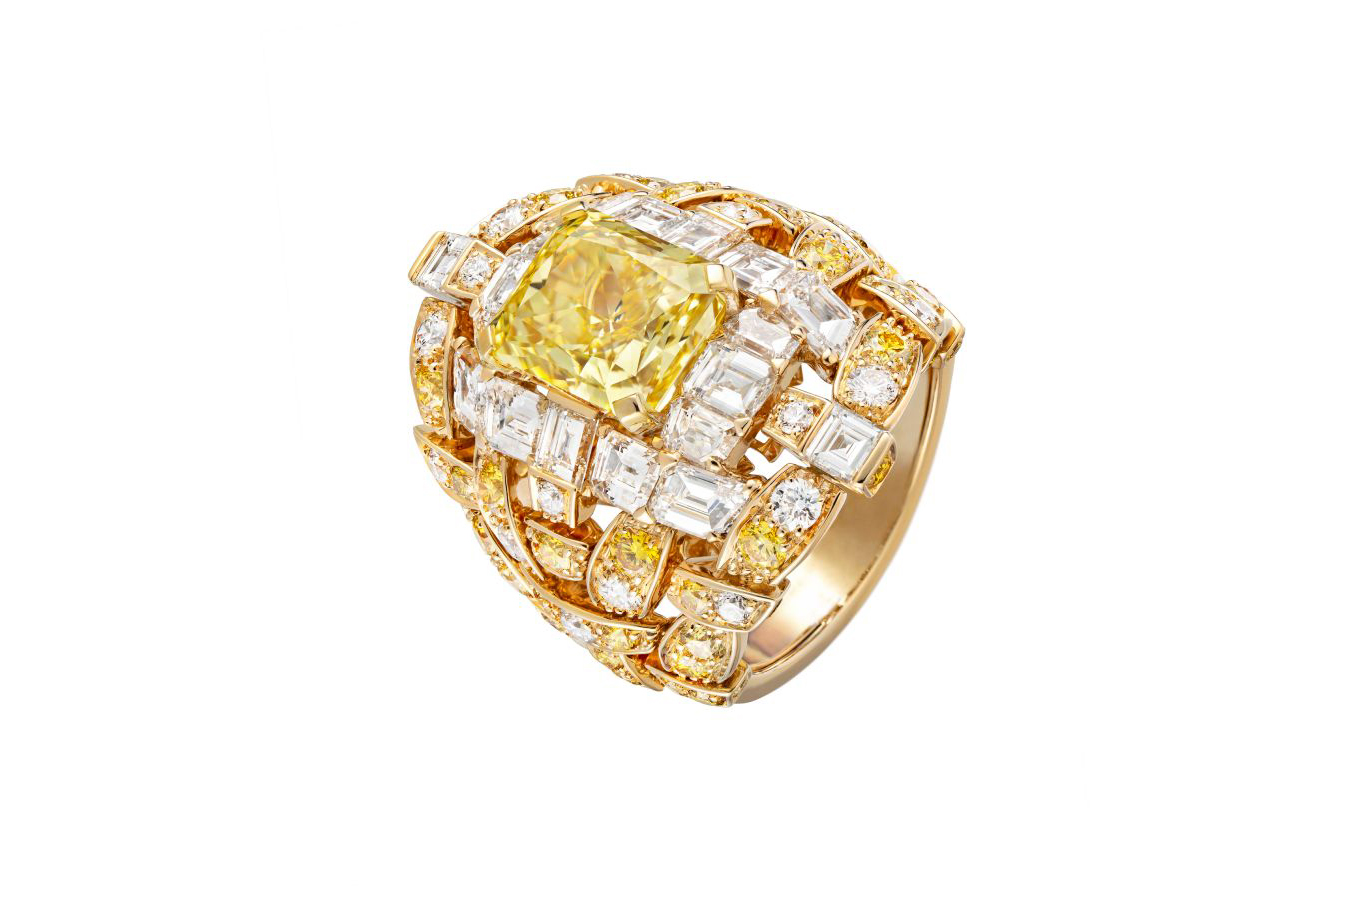 Chanel Tweed Icône ring with an emerald-cut yellow diamond of 5.50 carats, plus further colourless and yellow diamonds in yellow gold, from the Tweed Soleil set of the Tweed de Chanel High Jewellery Collection